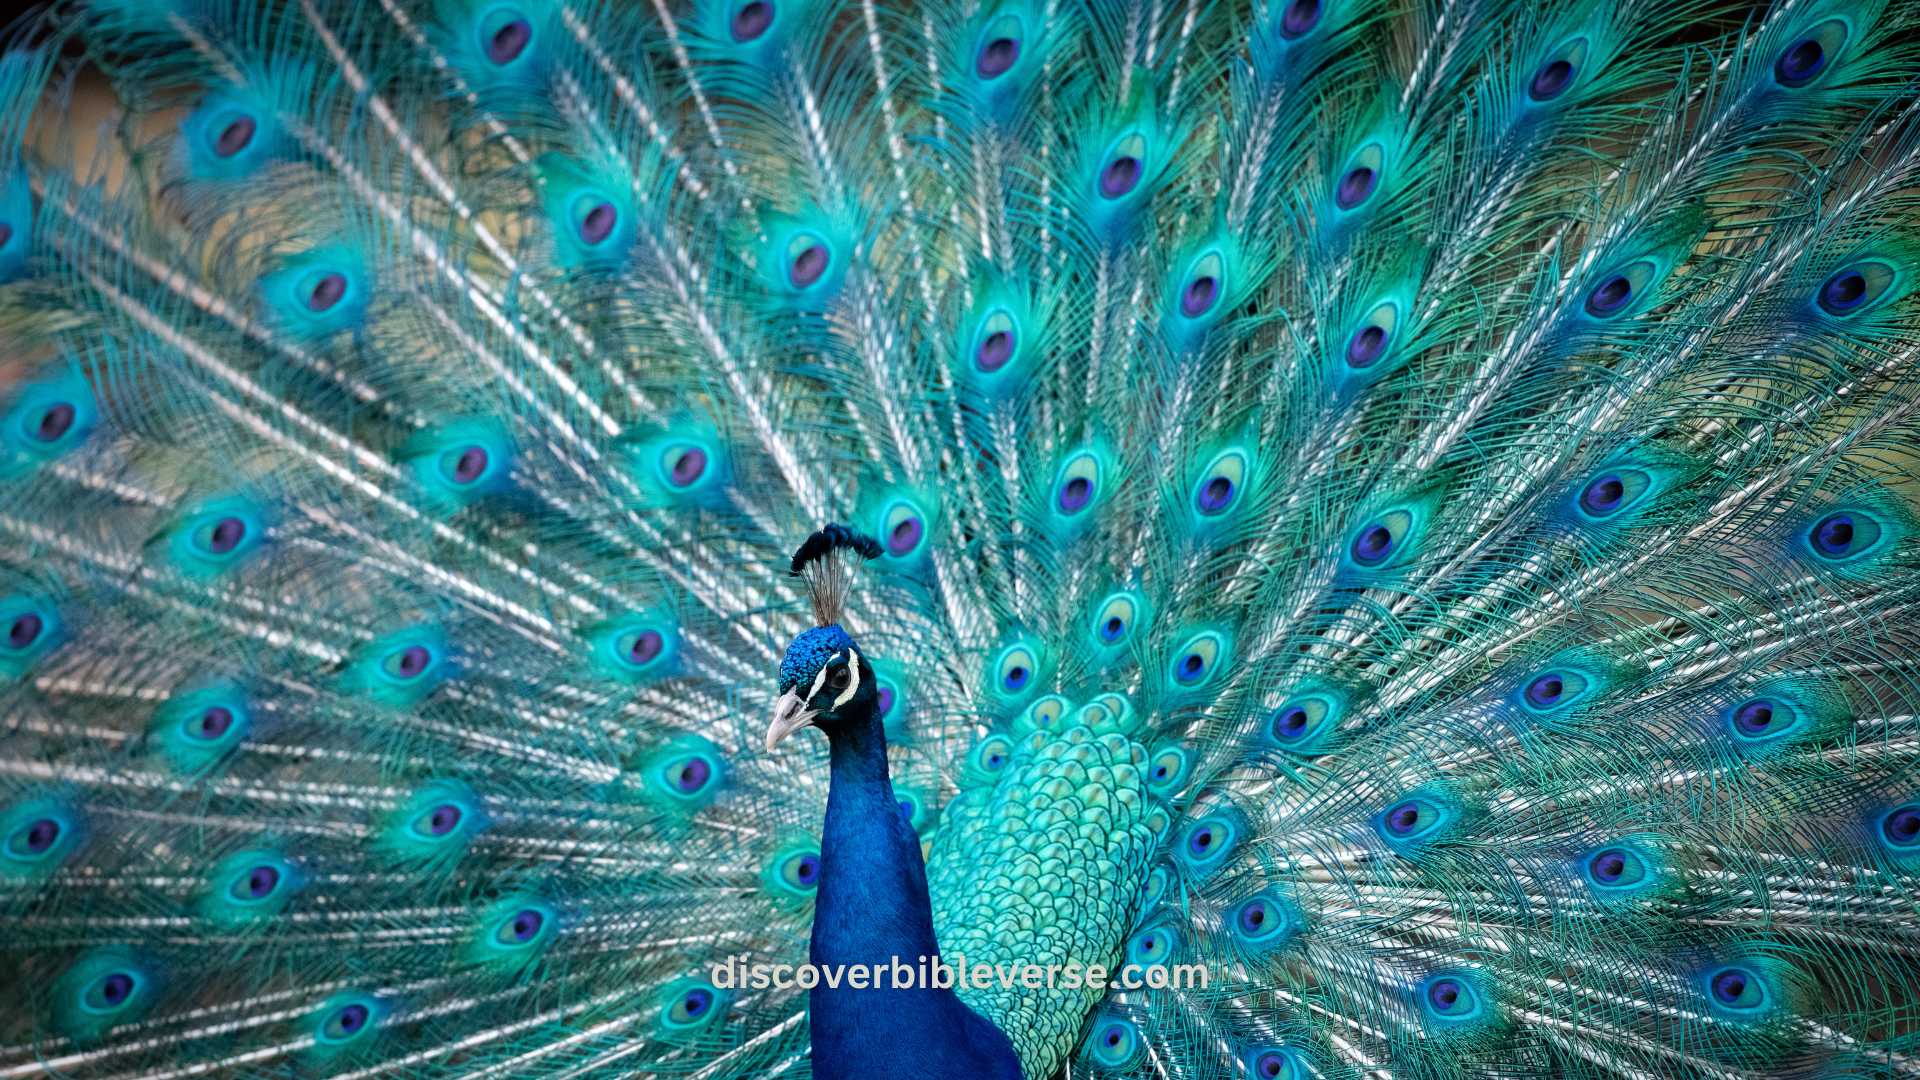 What is the Biblical Meaning of the Peacock?